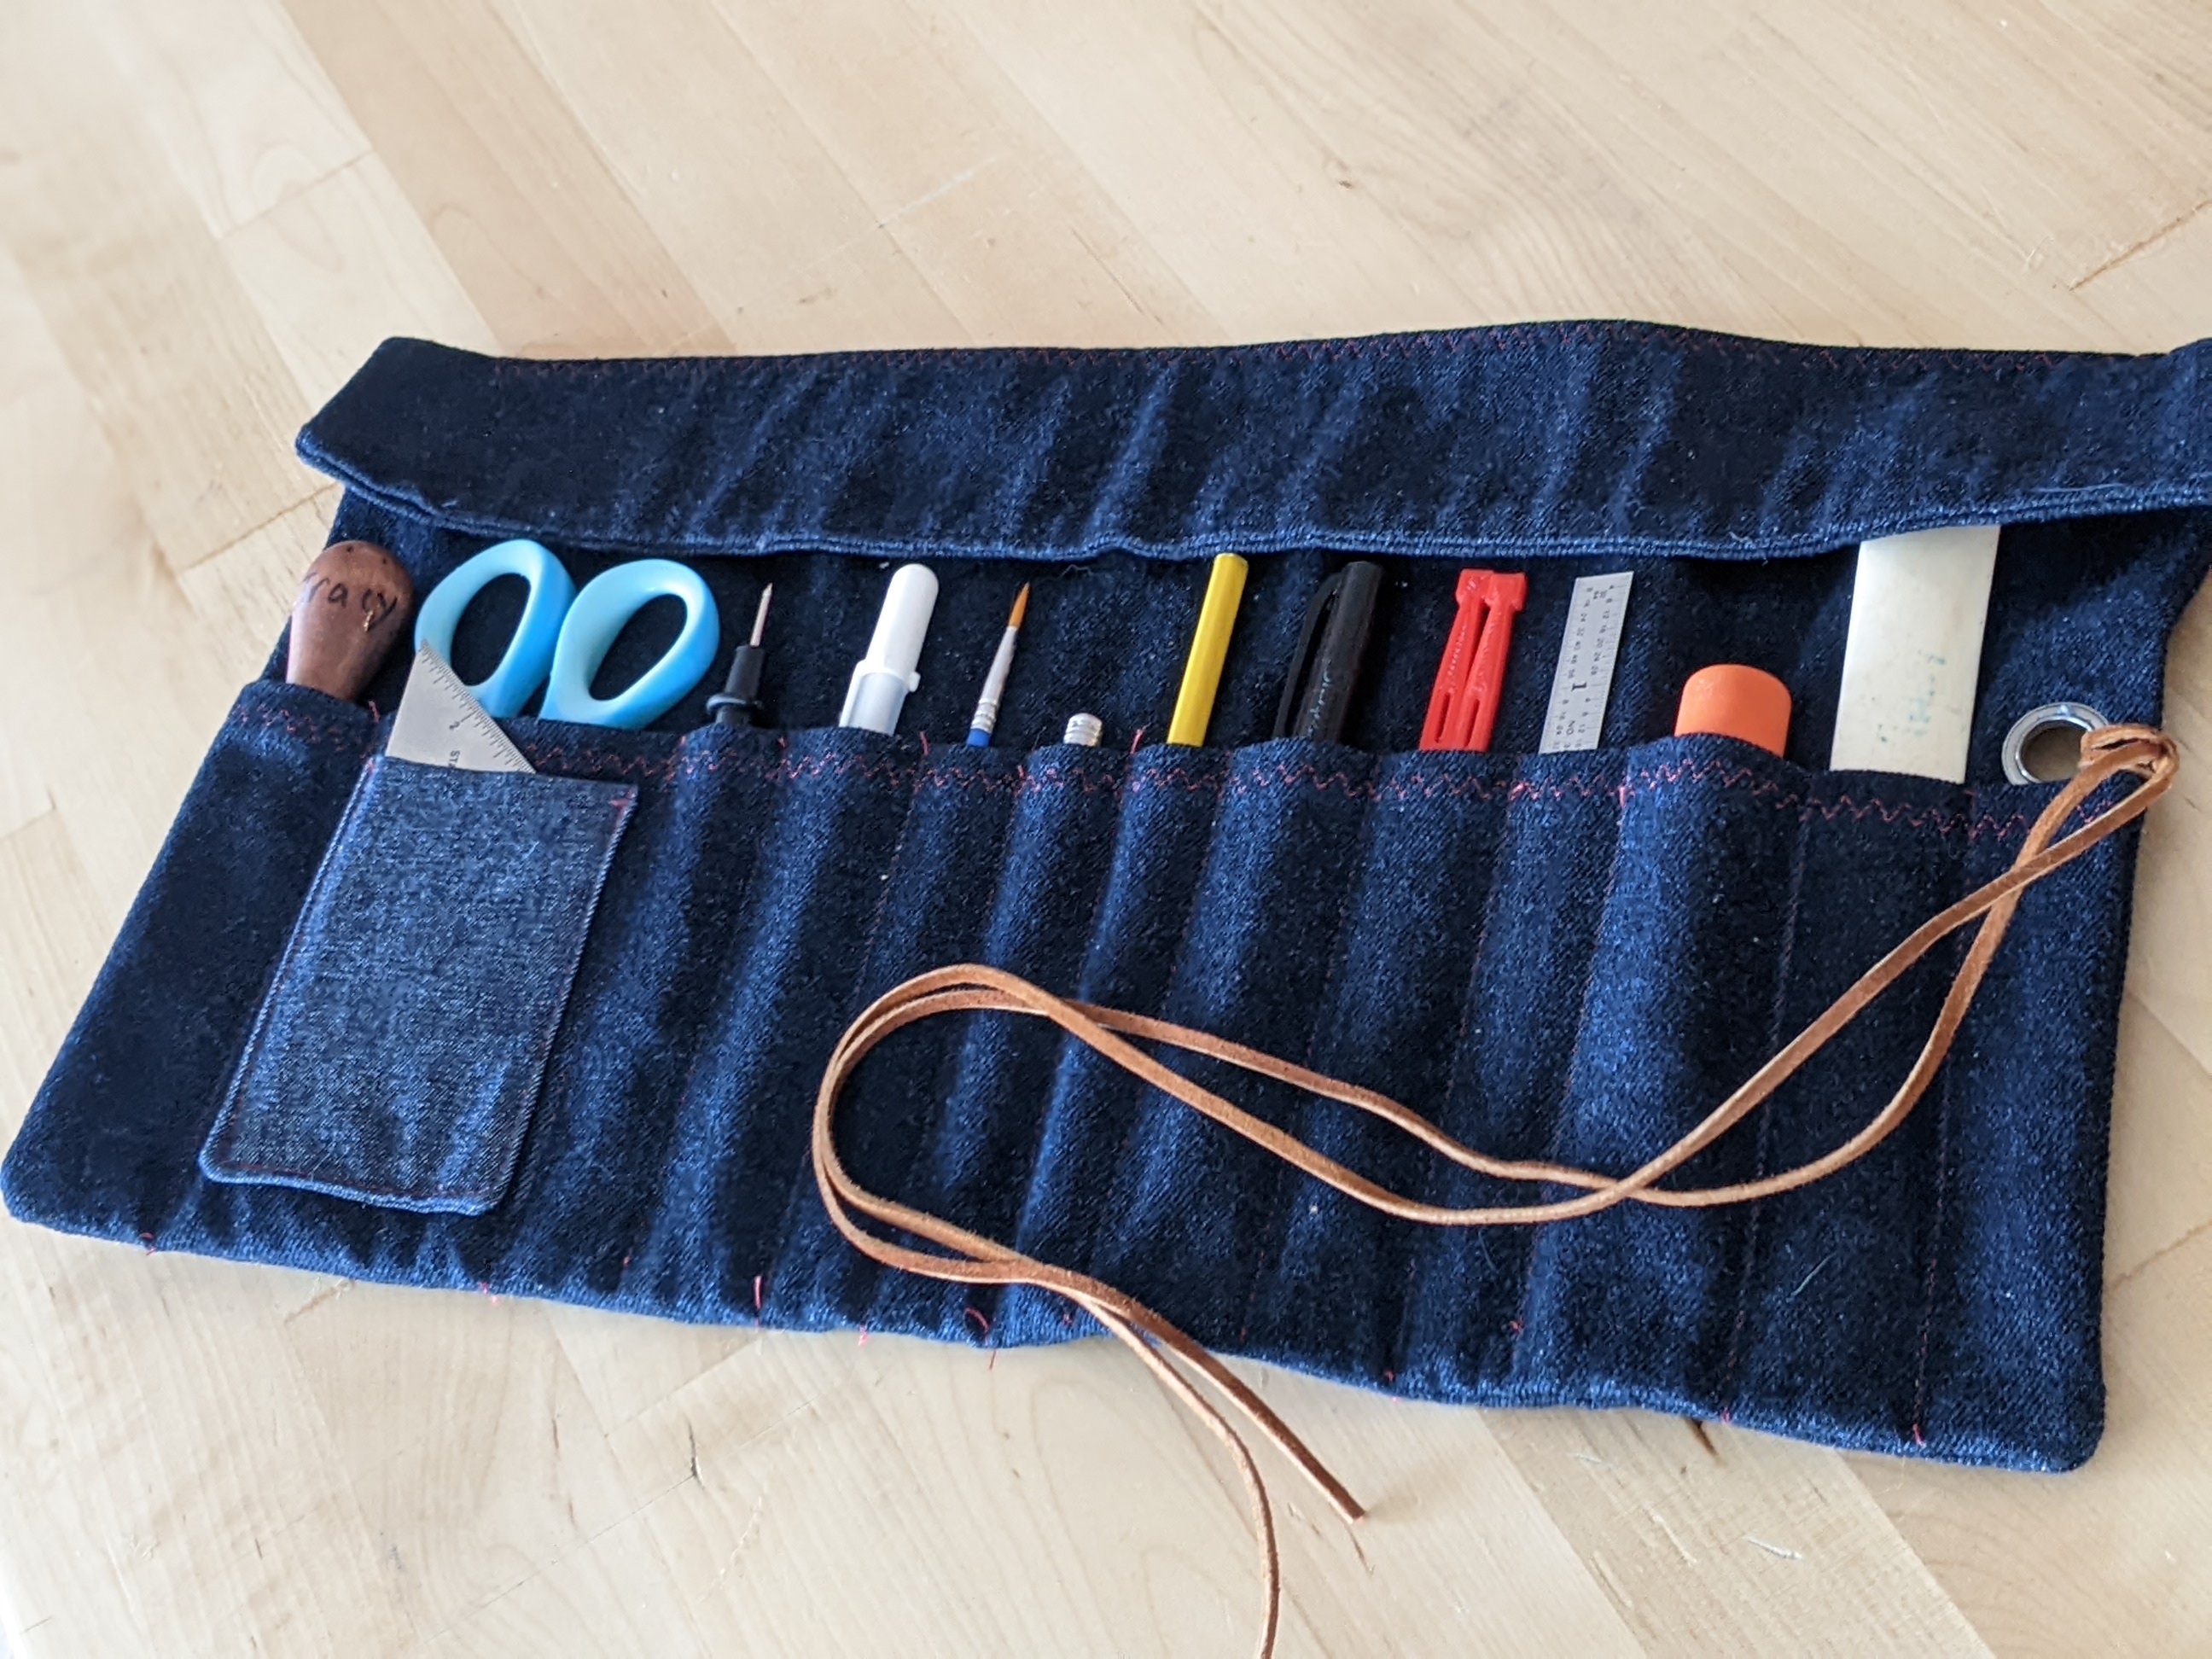 Denim handmade tool roll with tools and a leather strap